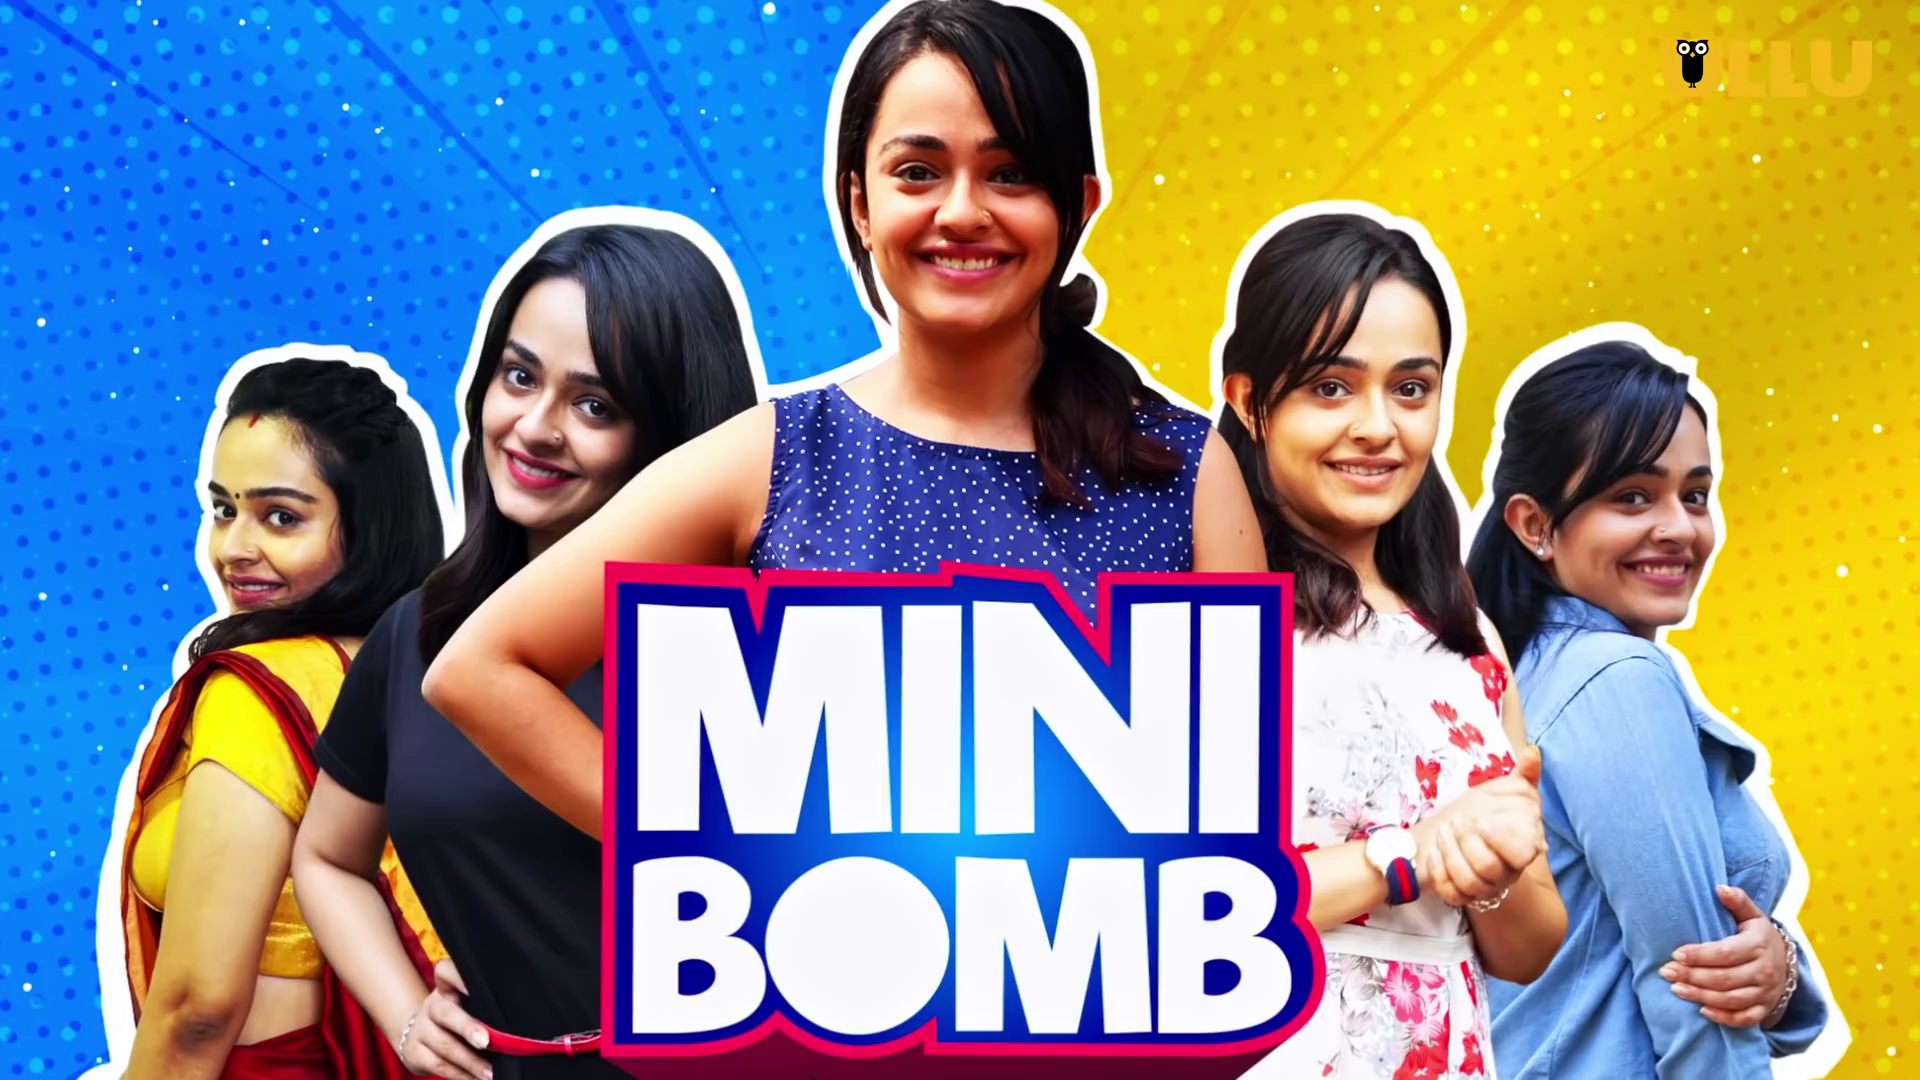 Mini Bomb Ullu Web Series All Episodes Streaming Online Now, Release Date Review Star Cast!